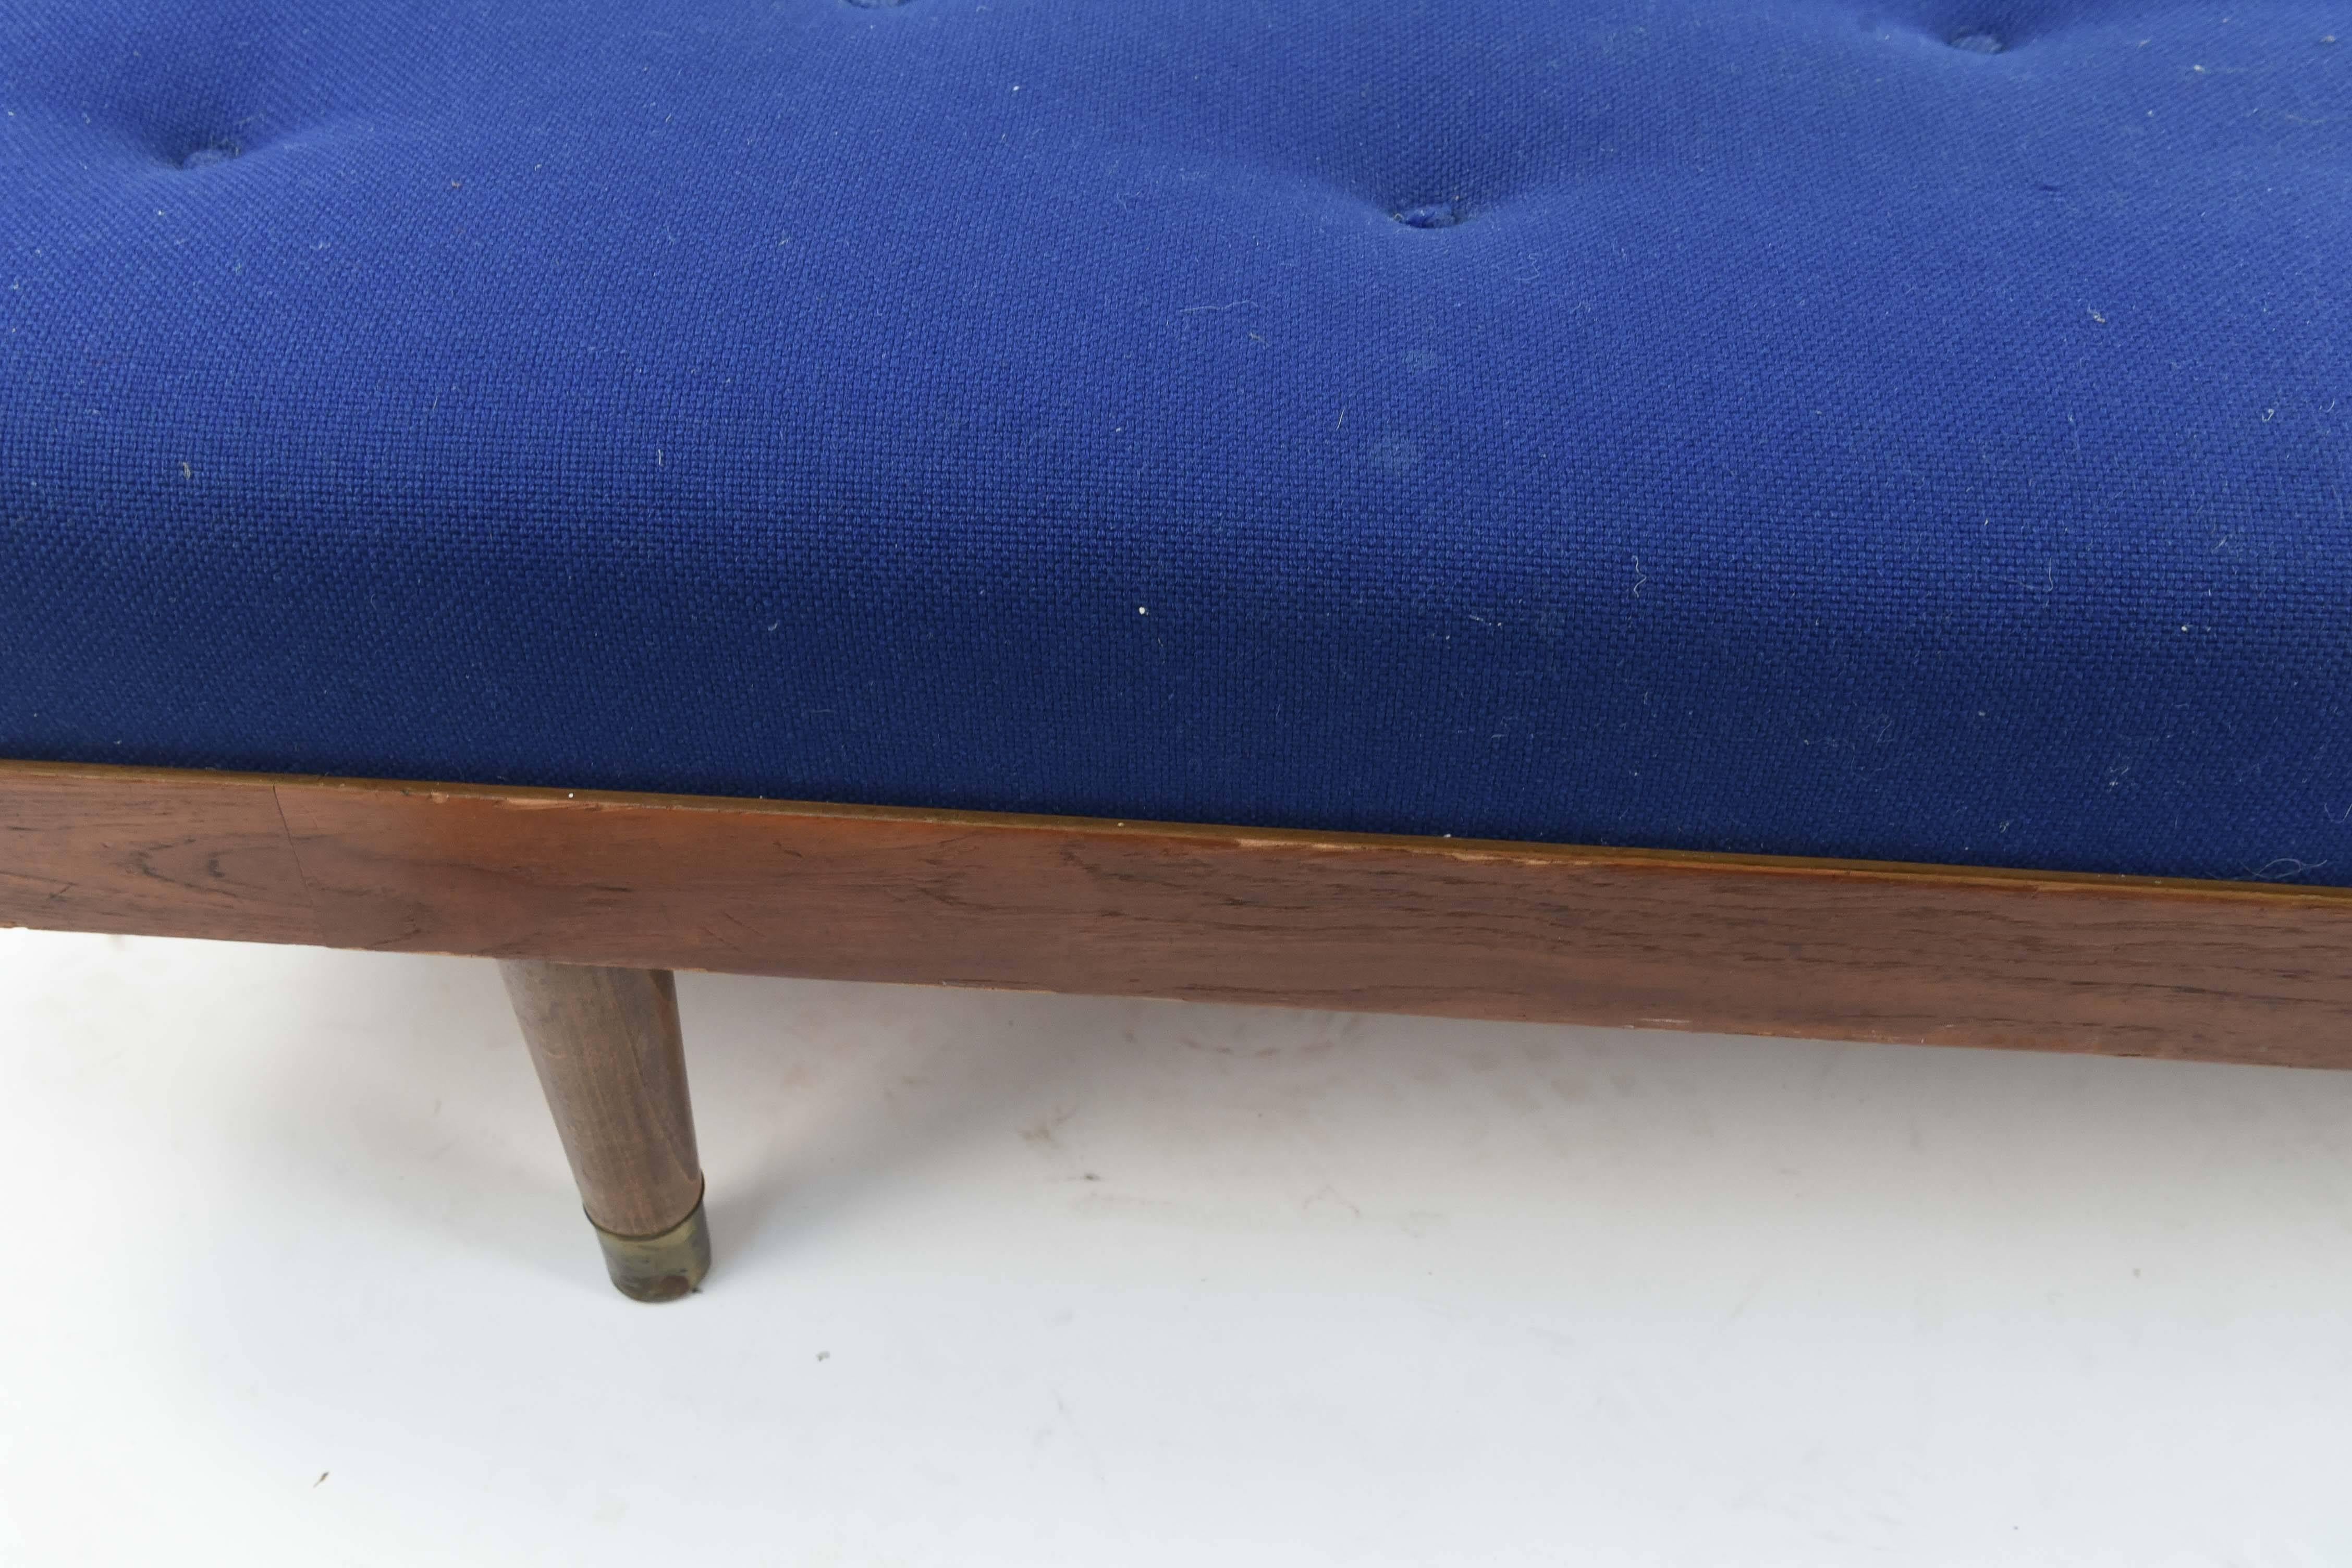 This Danish midcentury daybed features a teak frame and a striking, electric blue upholstered tufted seat cushion. A very eye-catching piece.